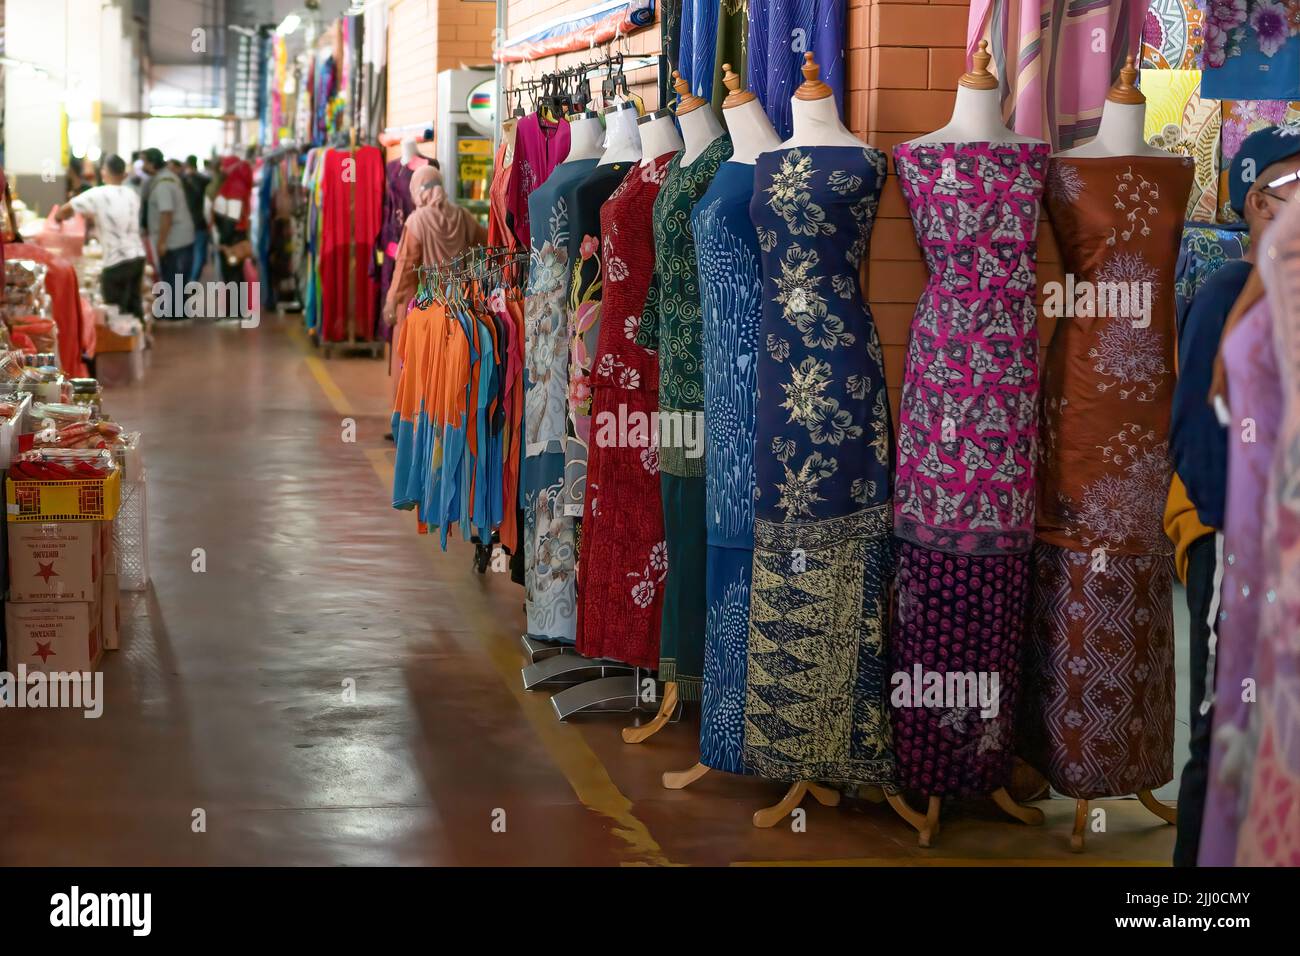 Terengganu, Malaysia: Jan 16, 2022 - Display of local textiles in front of small shops Stock Photo